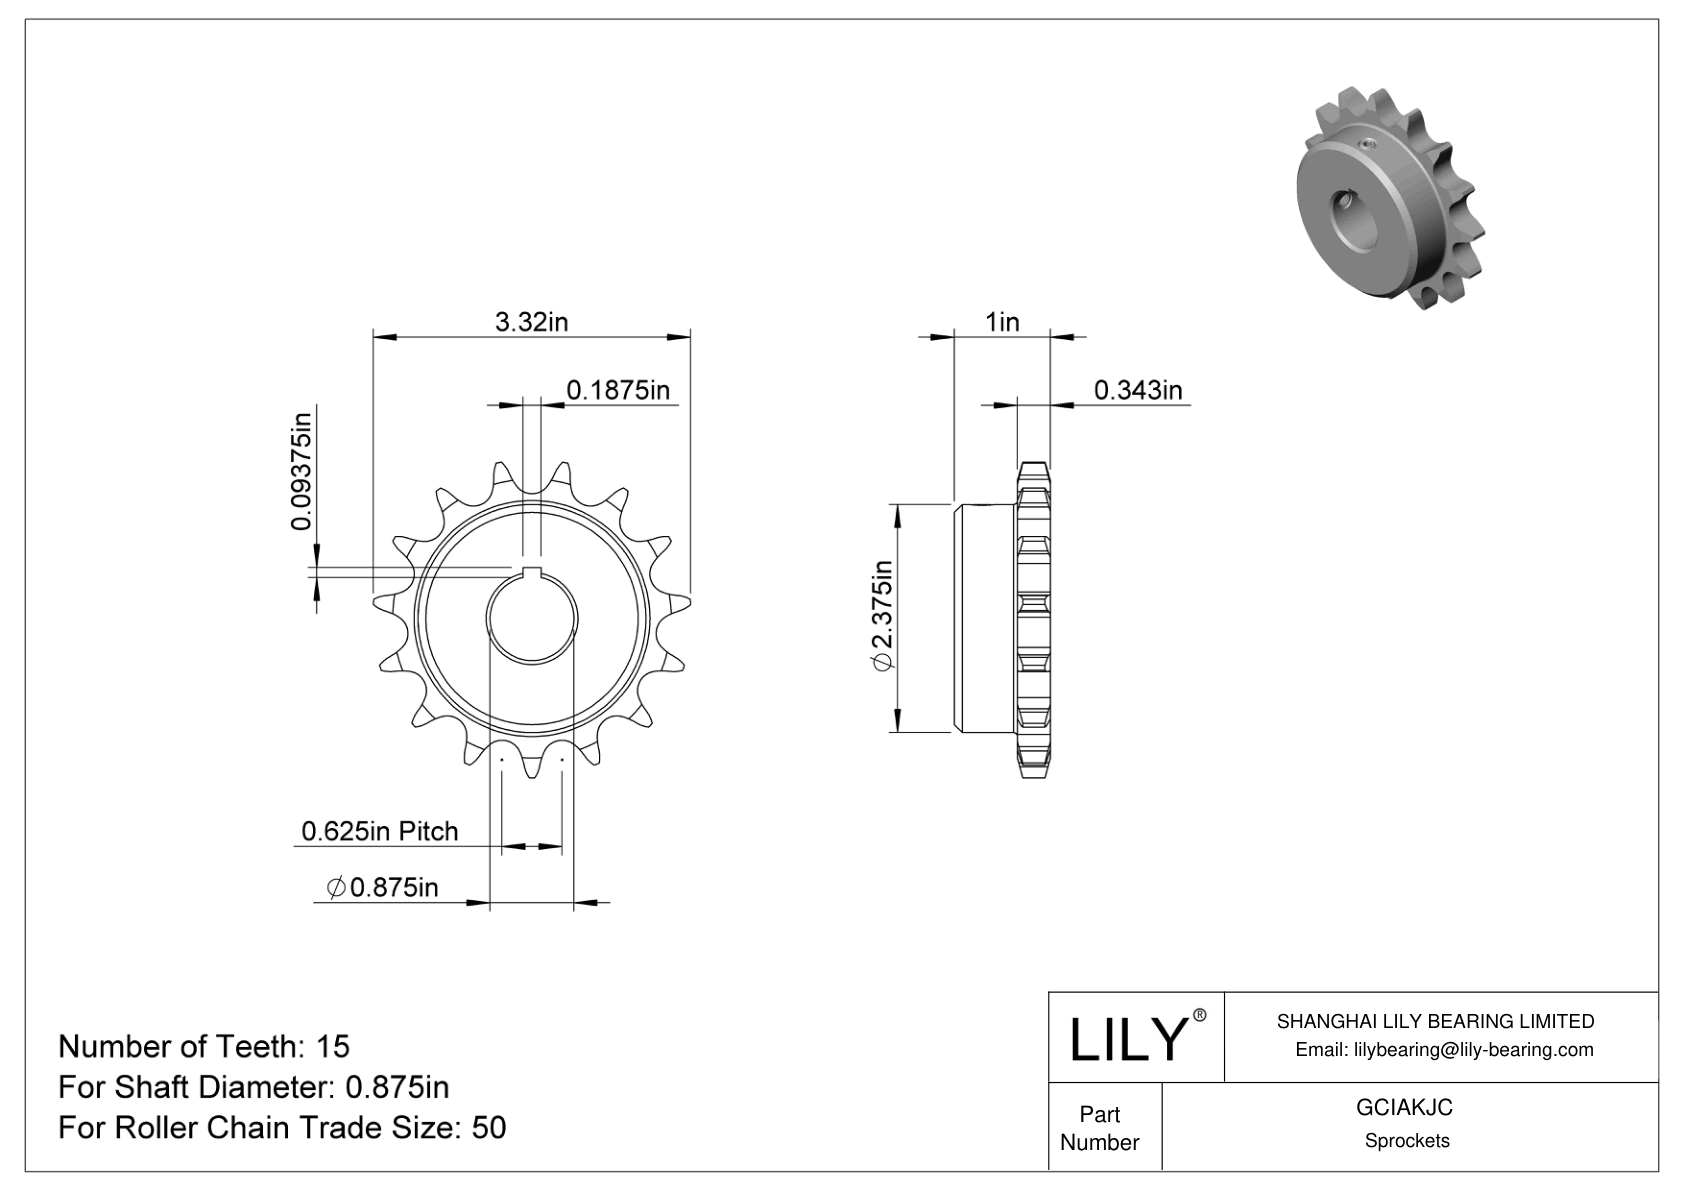 GCIAKJC Sprockets for ANSI Roller Chain cad drawing